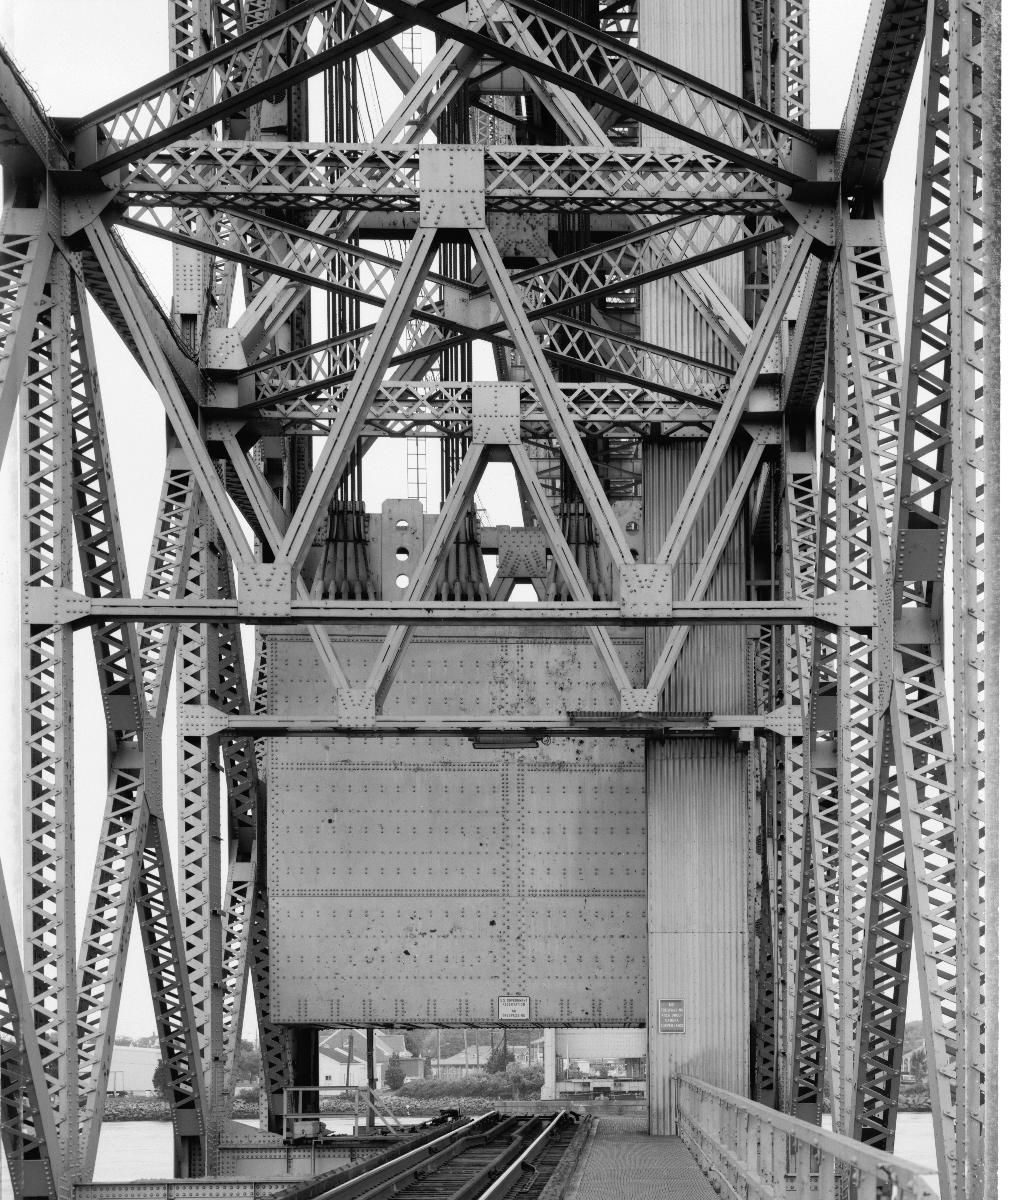 Media File No. 199223 DETAIL, SOUTHEAST SPAN THROUGH CANAL, VIEW BLOCKED BY STEEL, CLAD COUNTER WEIGHT, WATER SPAN RAISED OUT OF VIEW - Cape Cod Canal Lift Bridge, Spanning Cape Cod Canal, Buzzards Bay, Barnstable County, MA (HAER MASS,1-BUZBA,1–10)